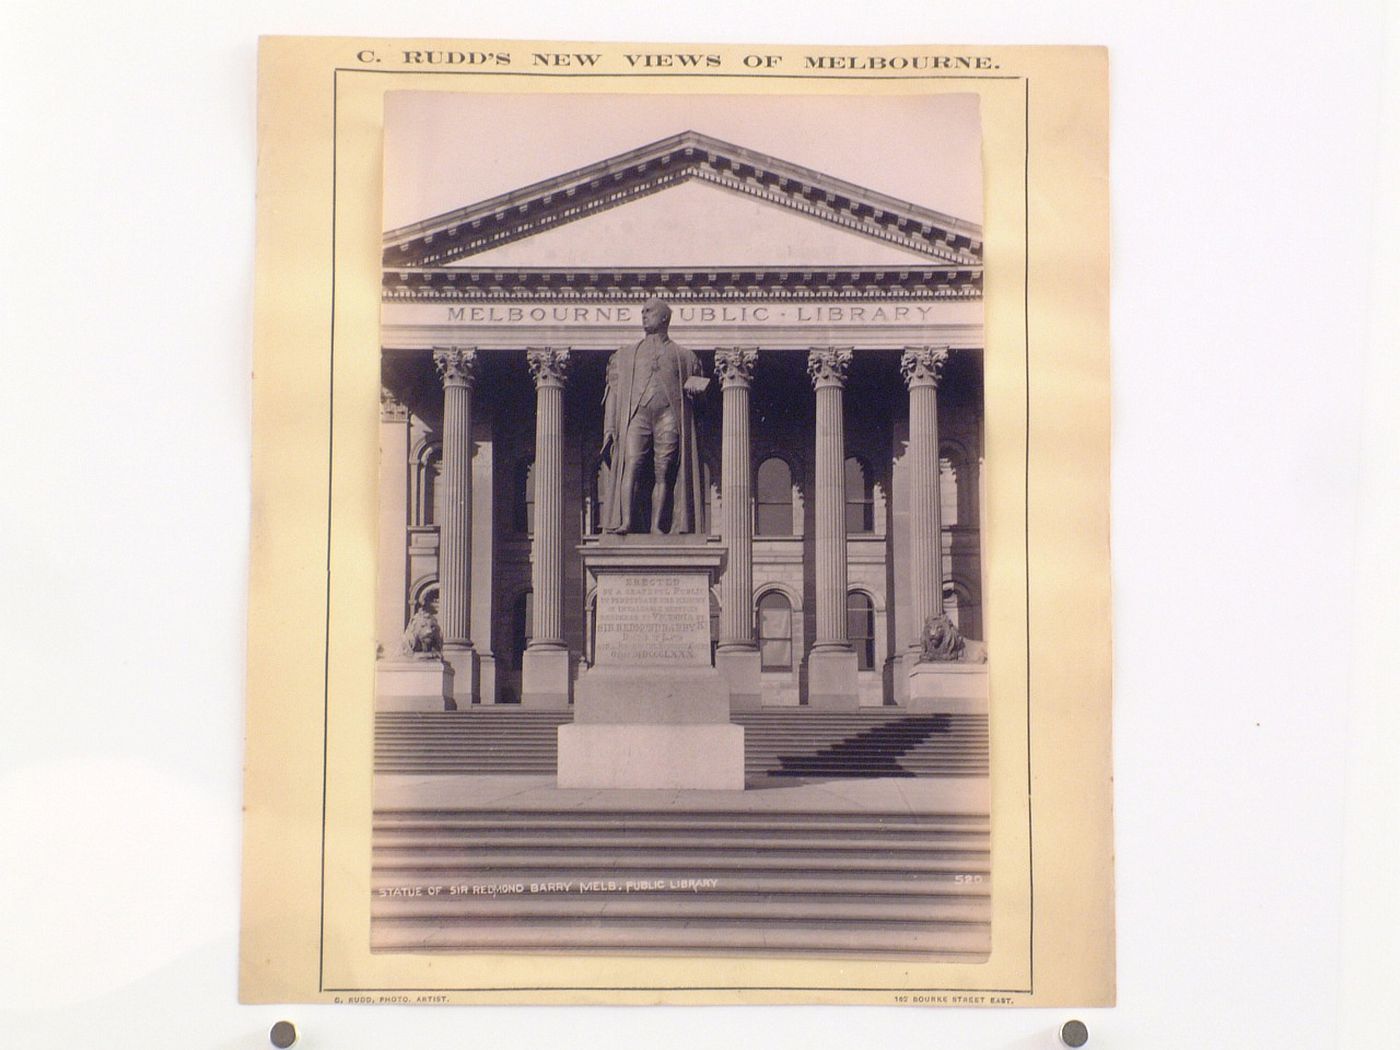 View of the statue of Sir Redmond Barry in front of the principal façade of Melbourne Public Library (now the State Library of Victoria), Australia